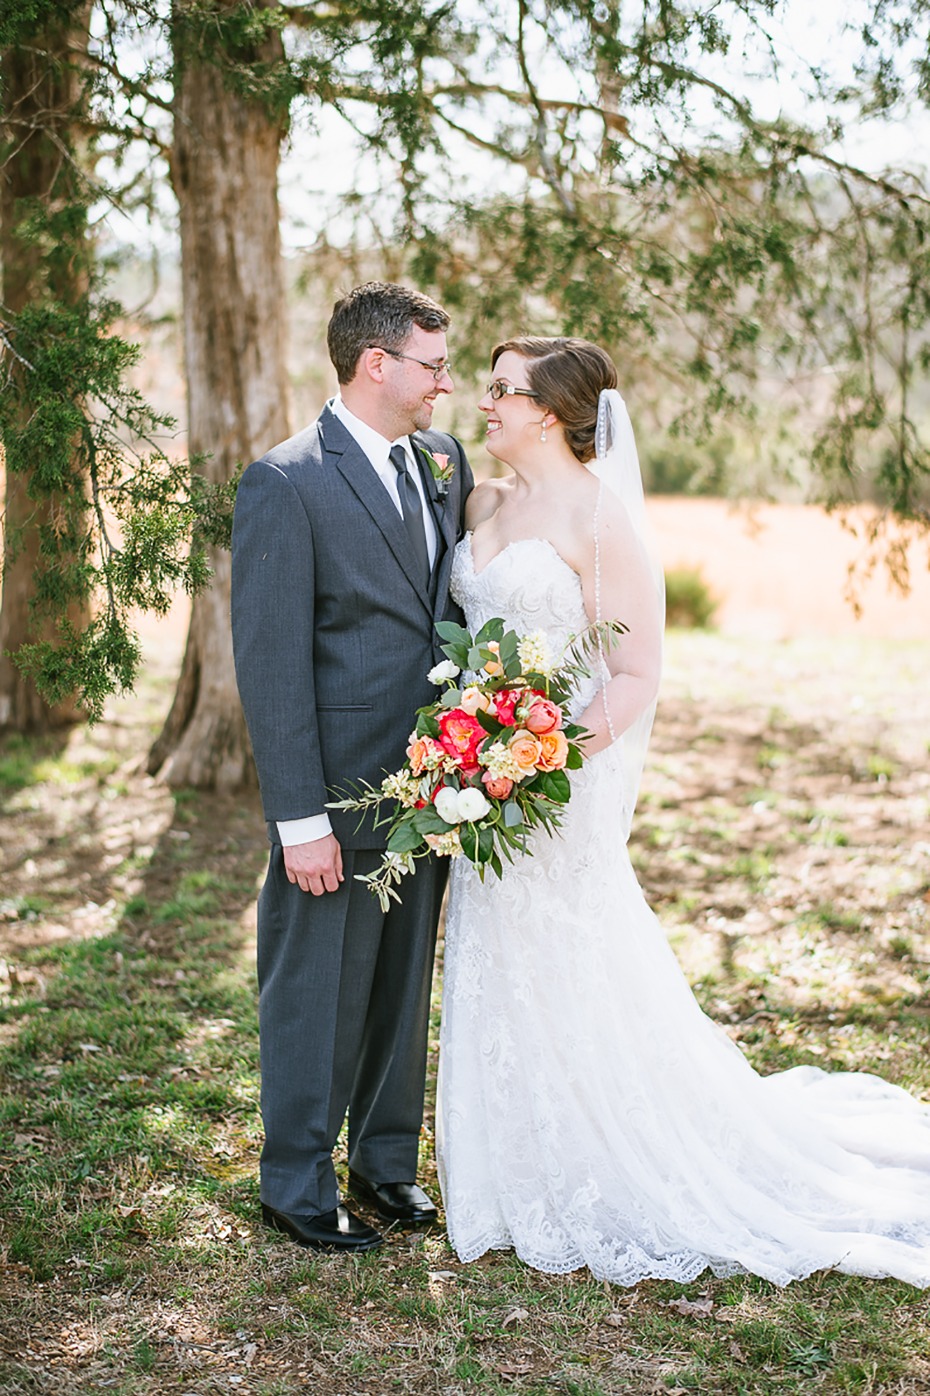 Elegant chic wedding at Cold Springs Events